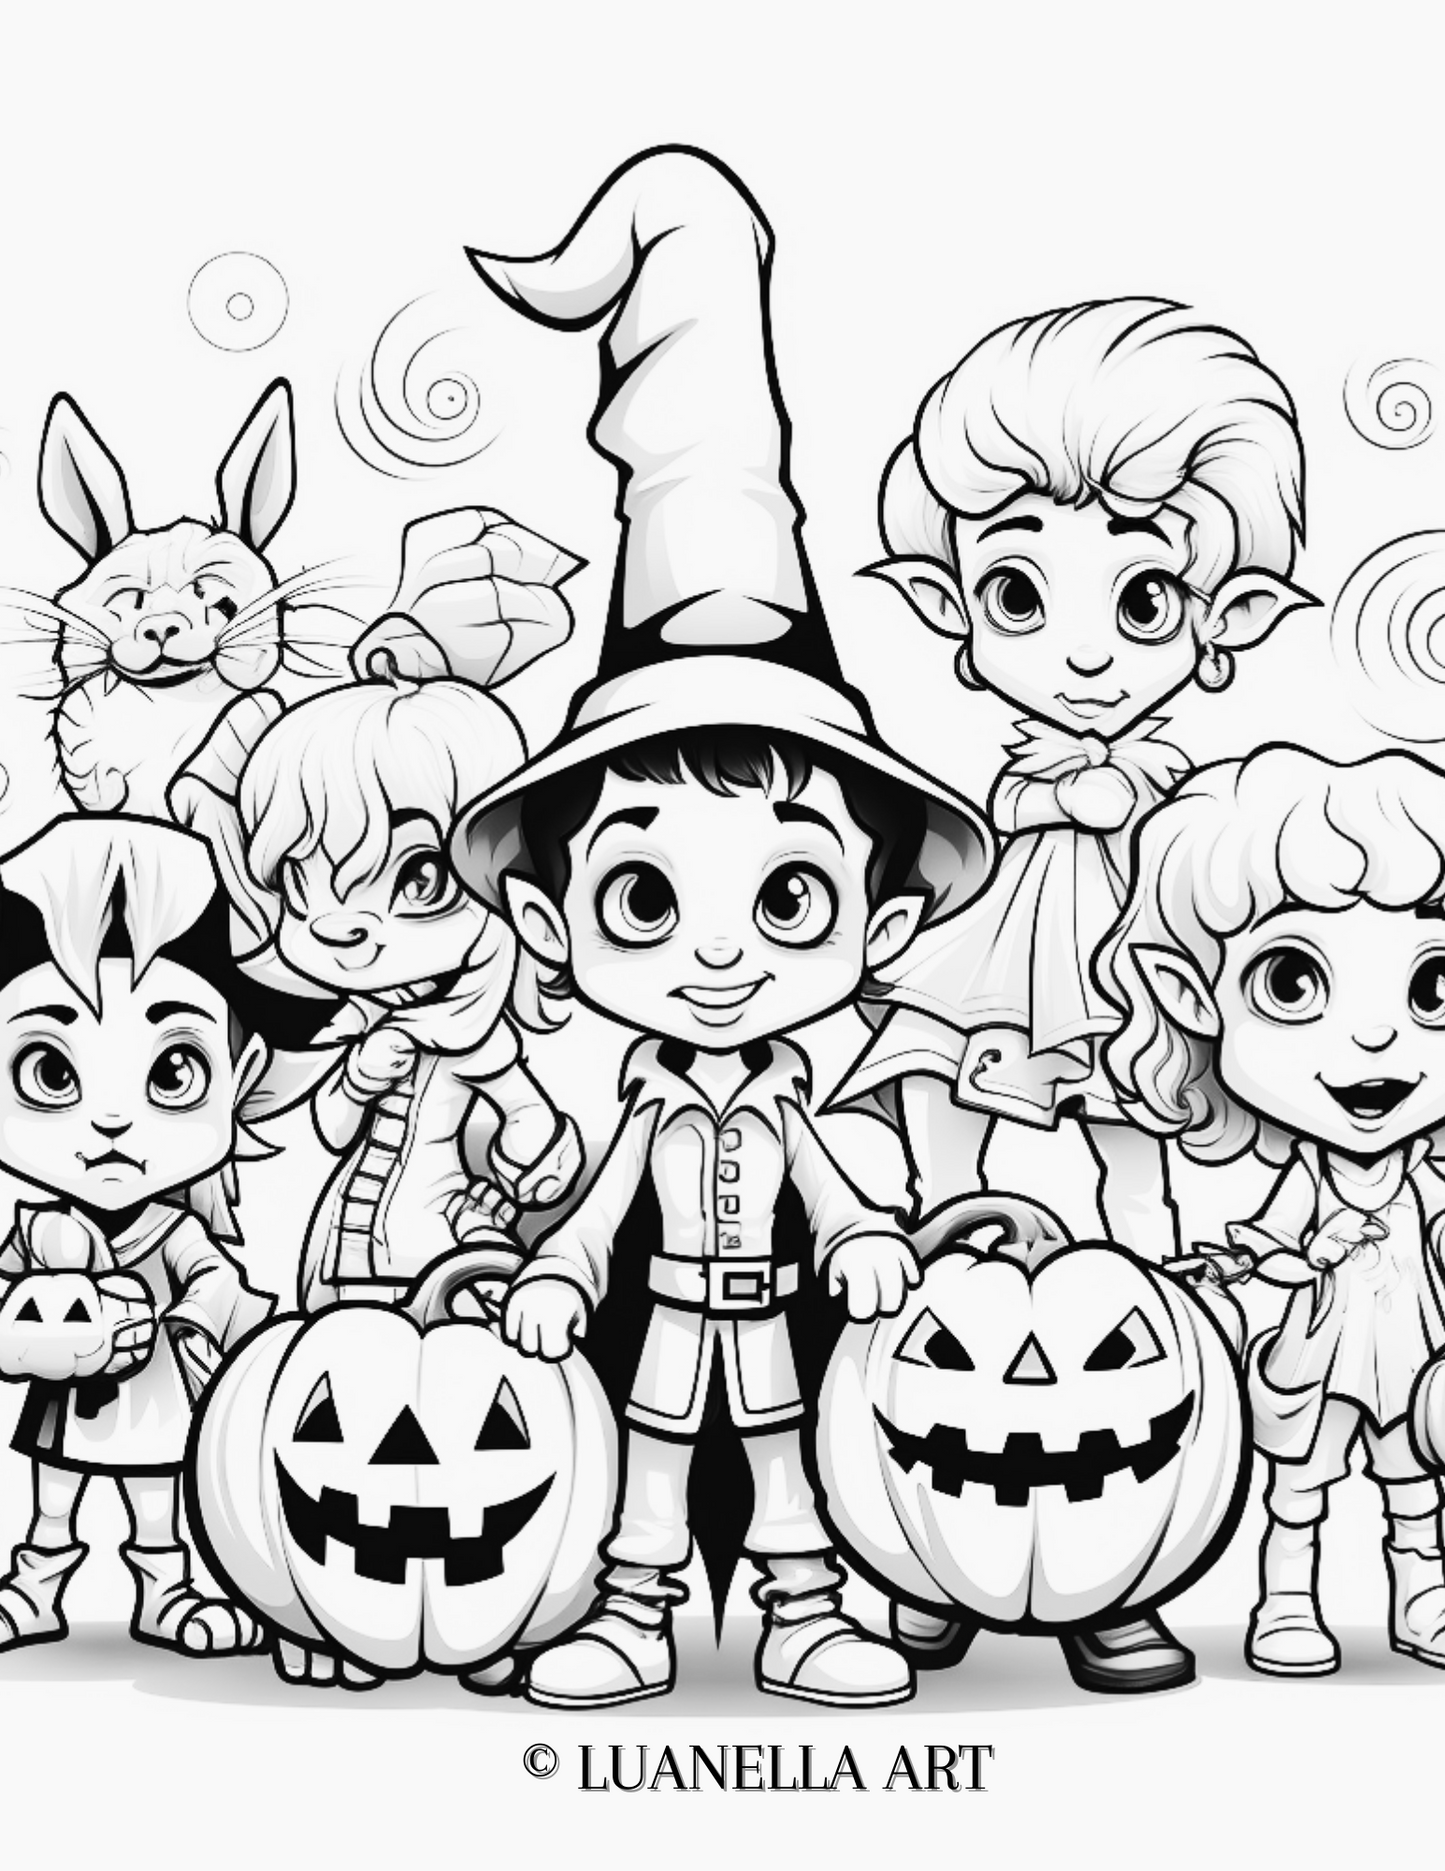 Kids ready for Trick of Treat Halloween scene | Coloring Page | Instant Digital Download